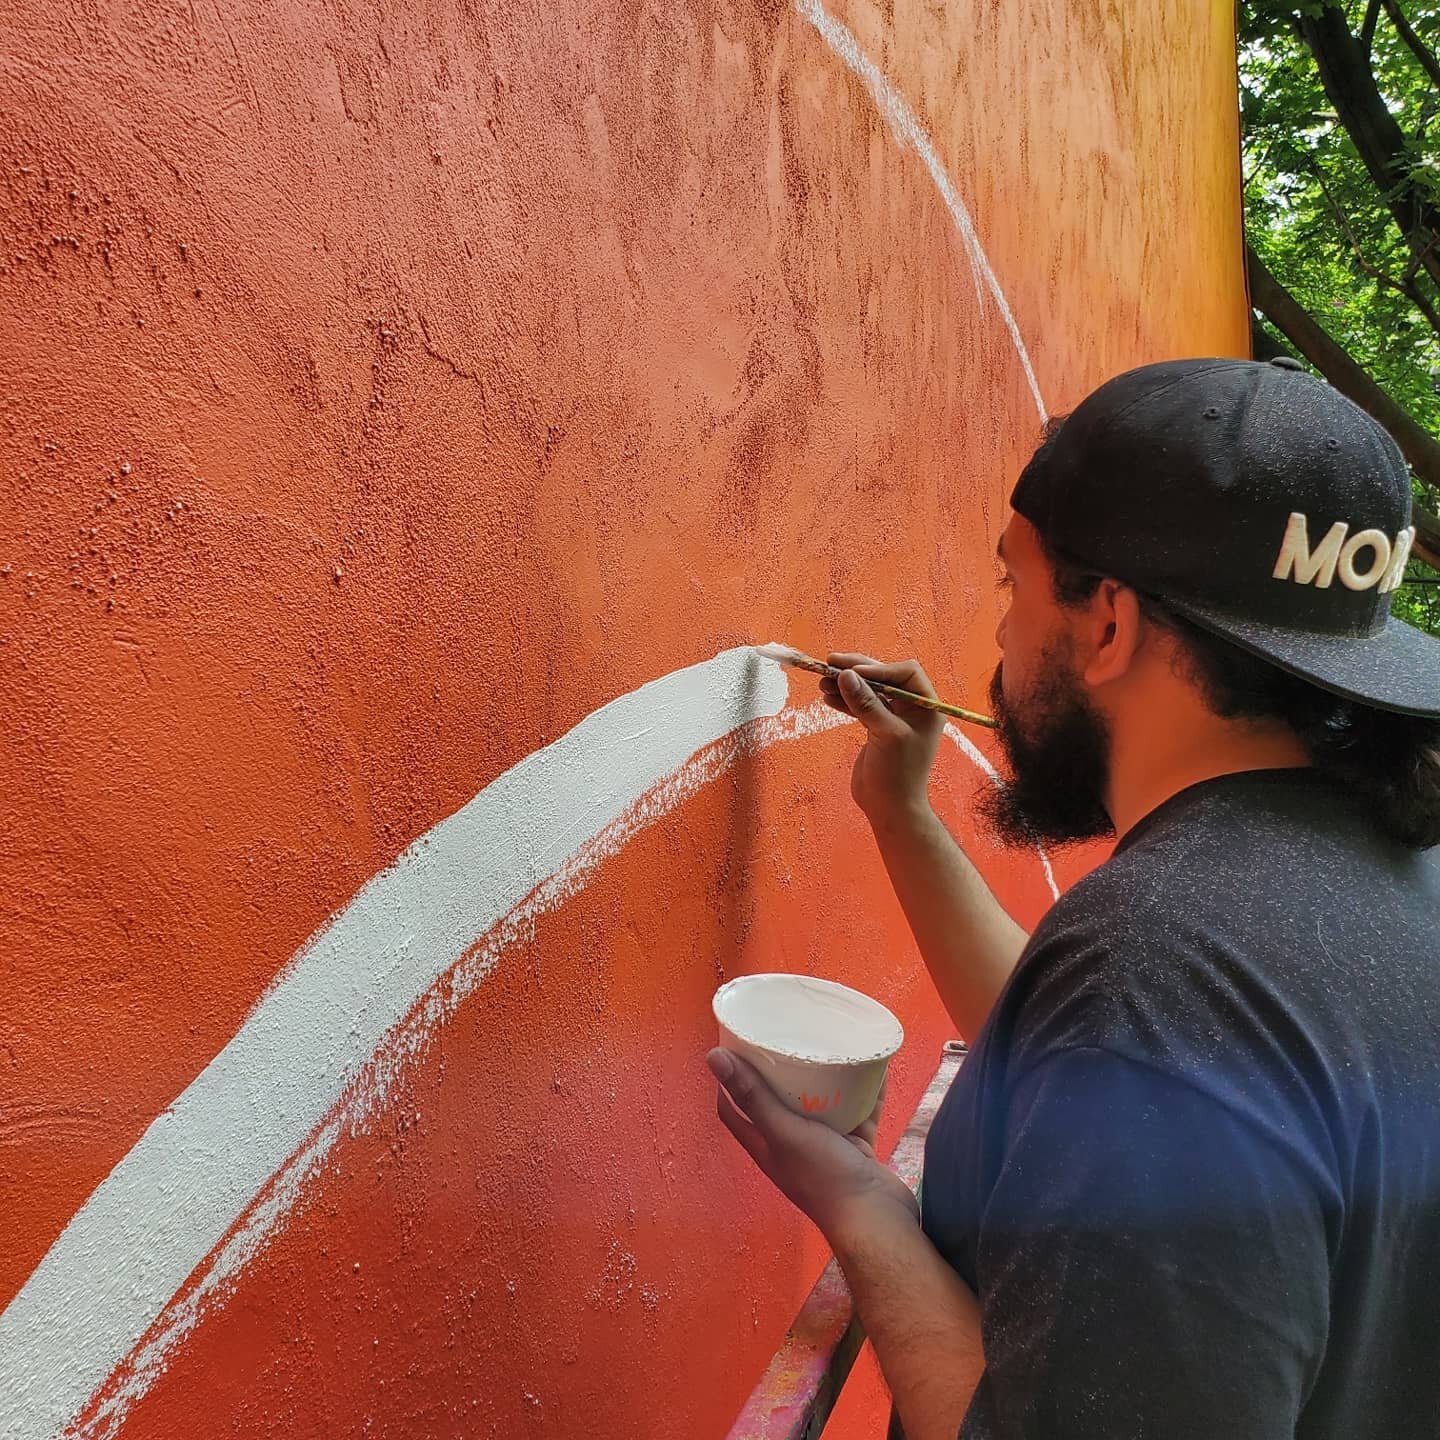 Views from the Beaver Street Mural project! Made tons of progress during our last community paint day. Catch @azar_ele and @salina_almanzar_art finalizing the mural over the next two weeks!